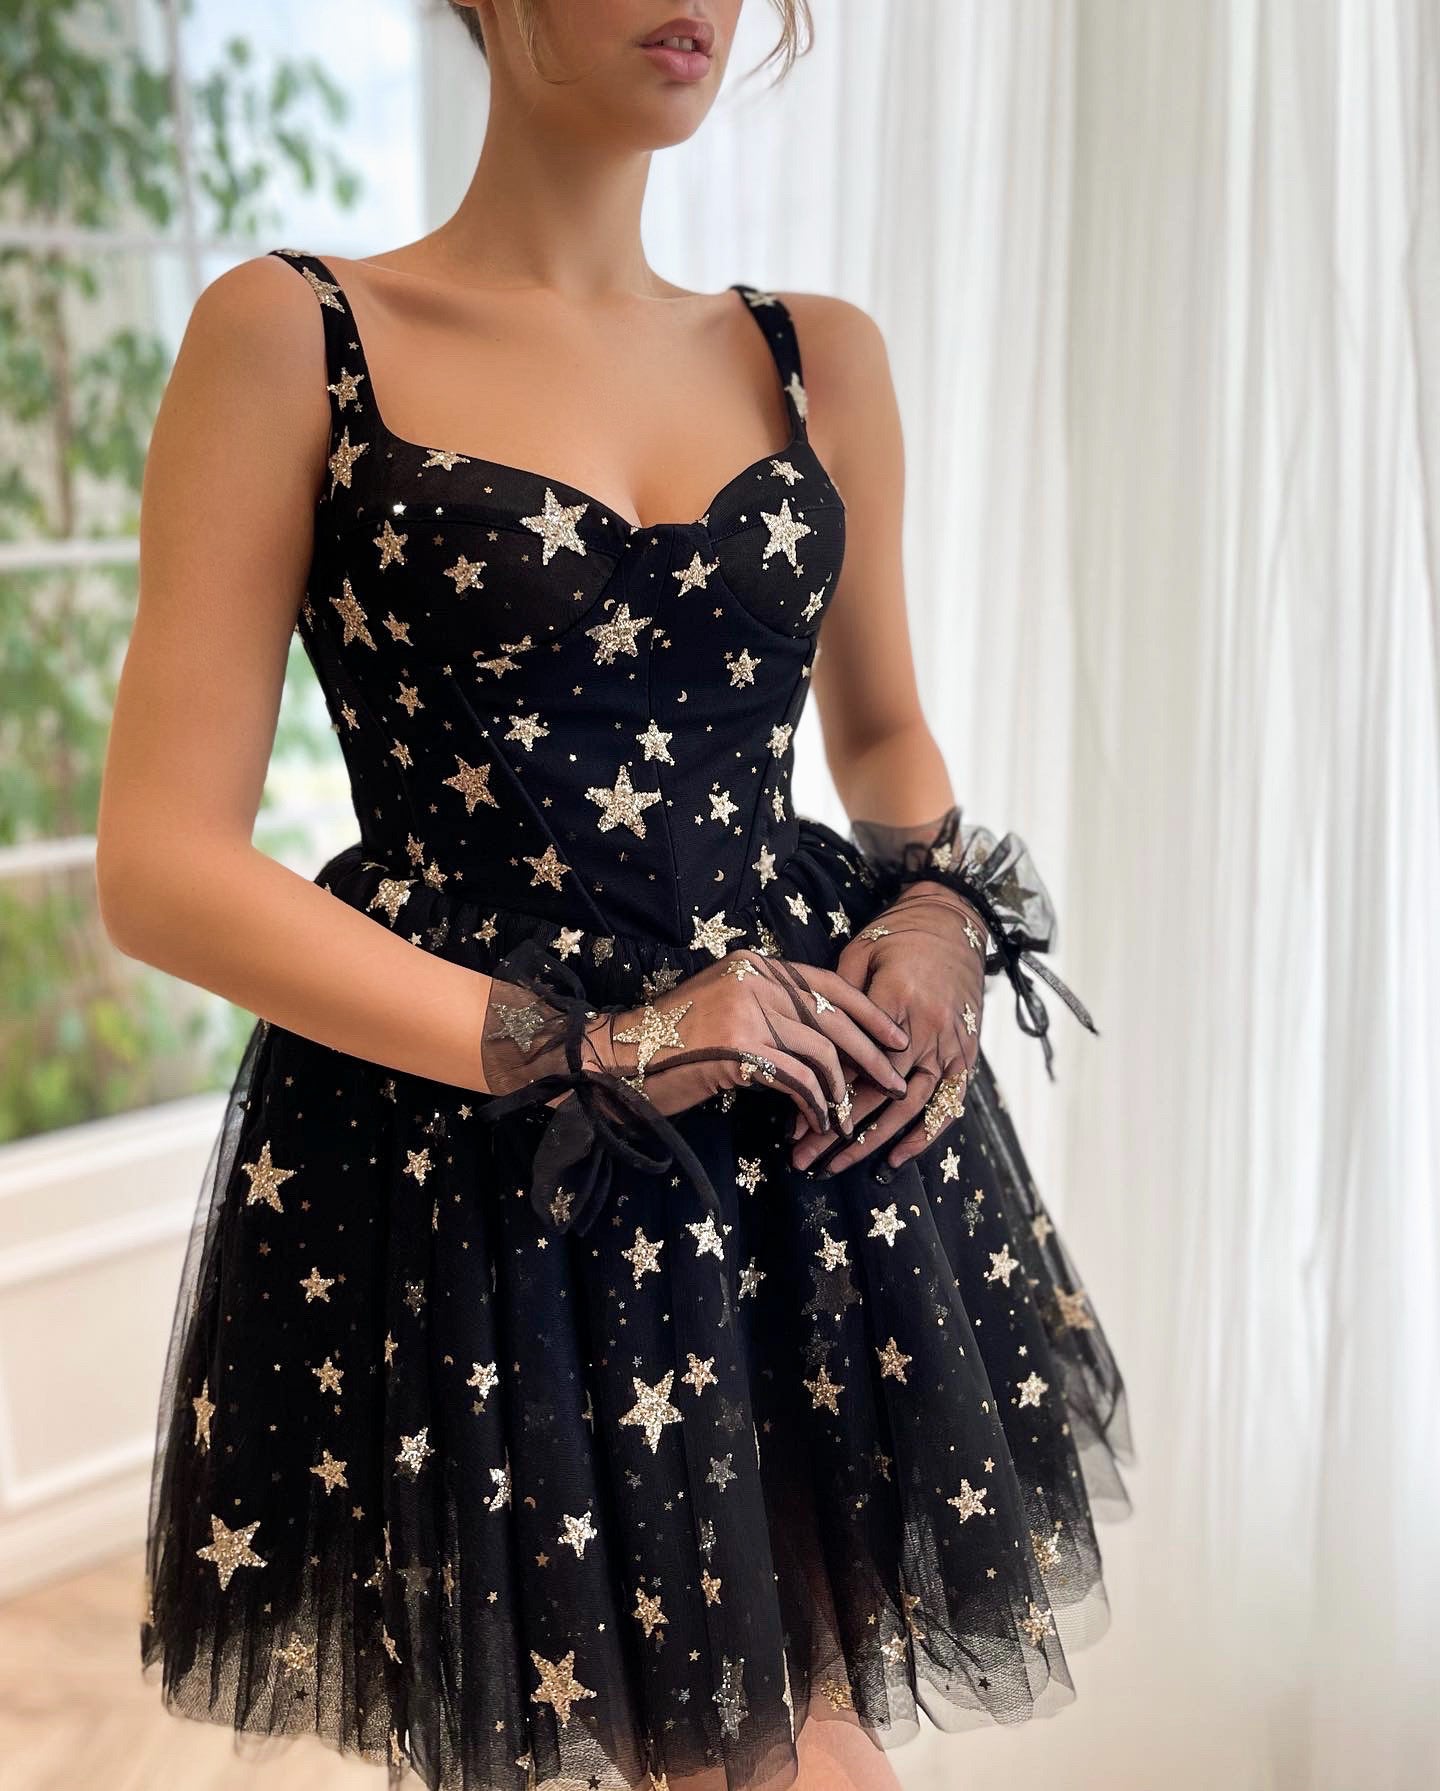 Black mini dress with straps, gloves and starry fabric